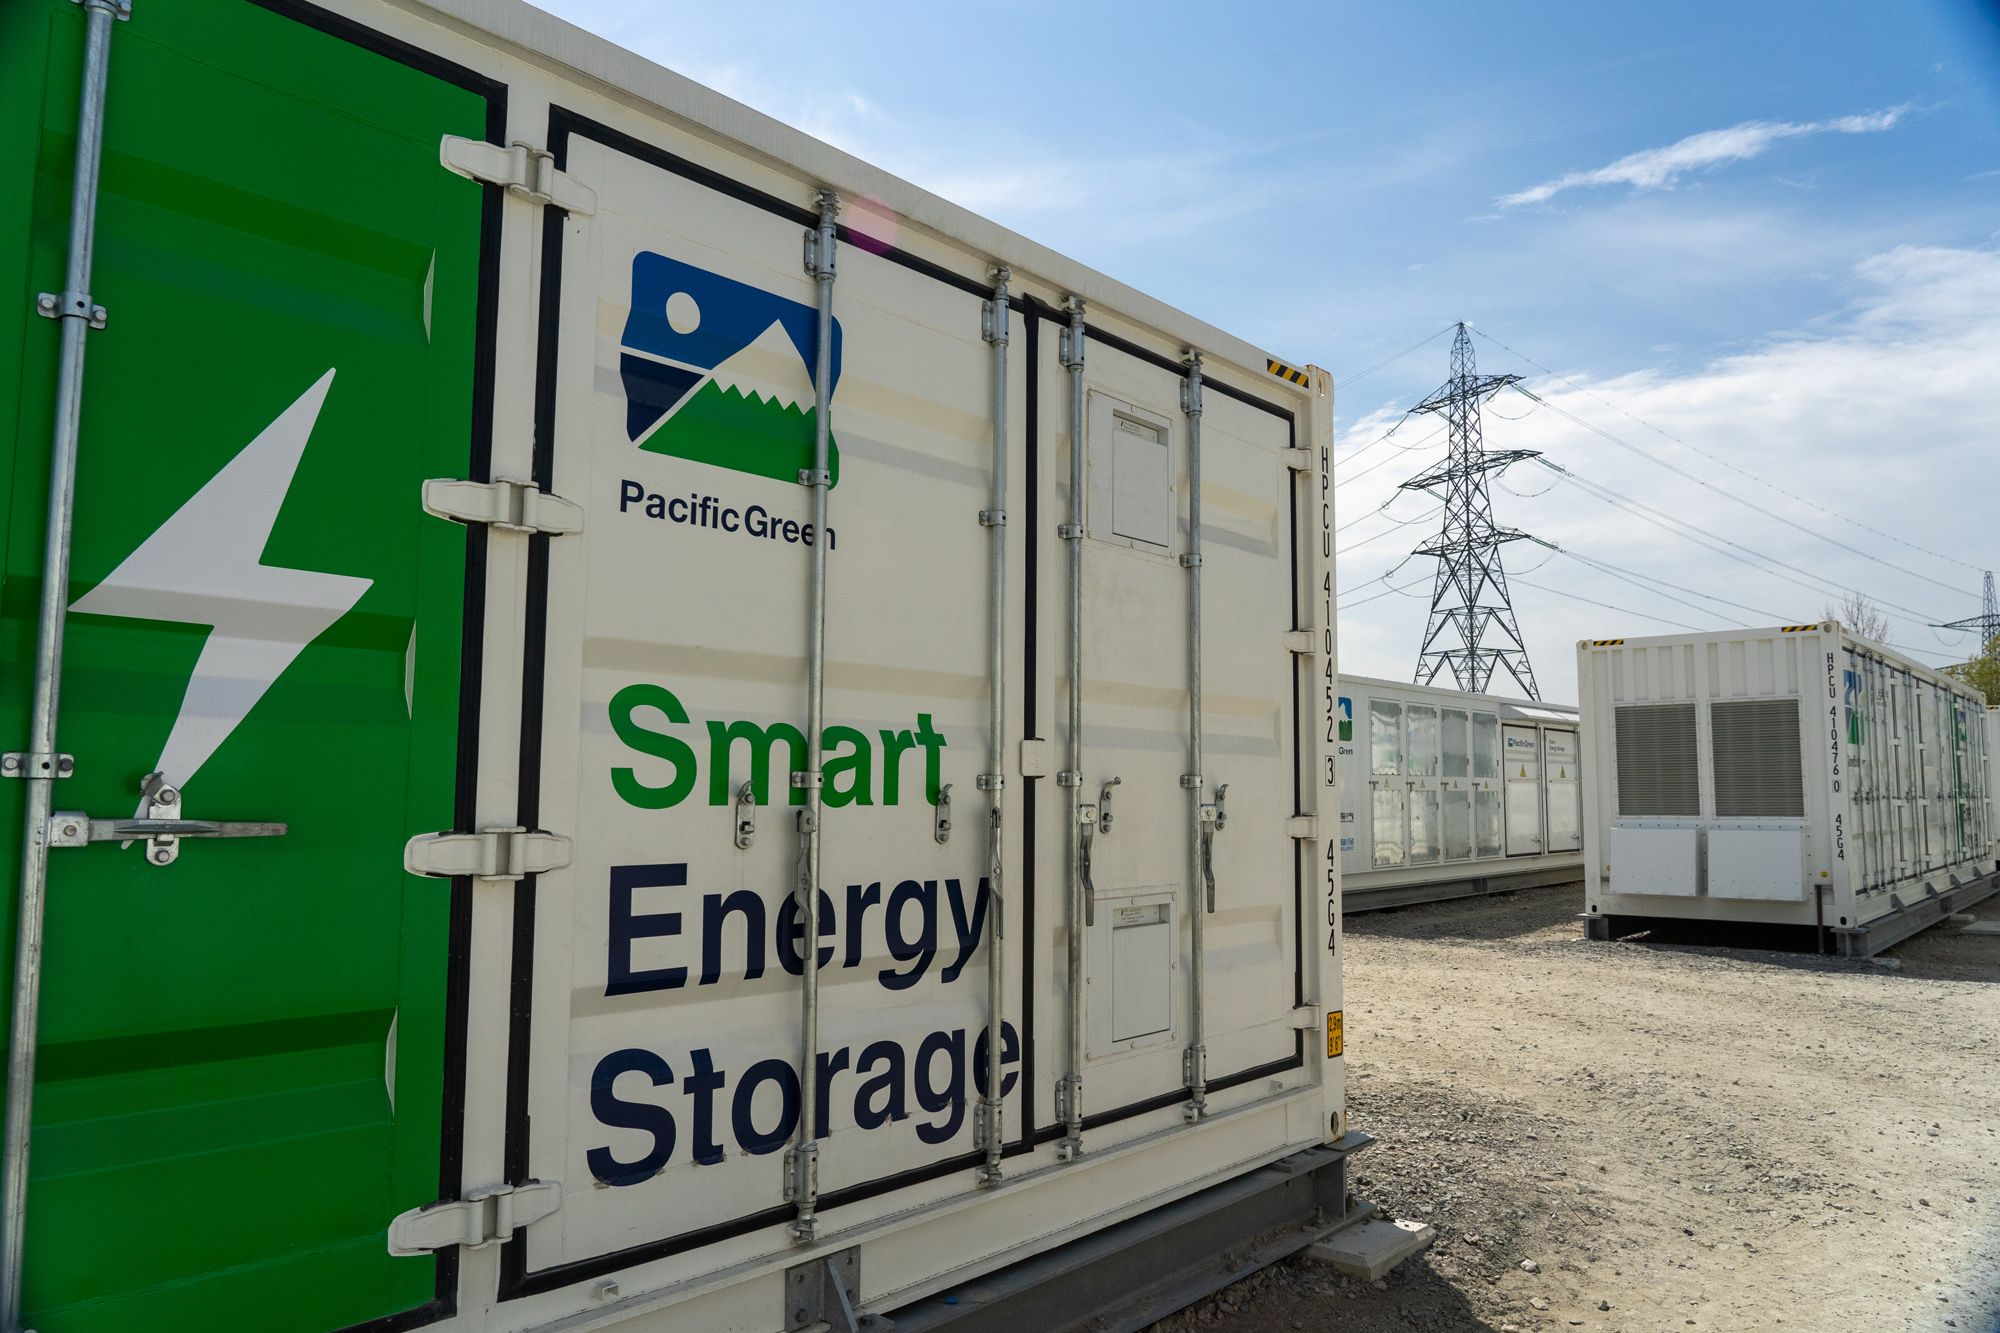 Pacific Green energy storage parks